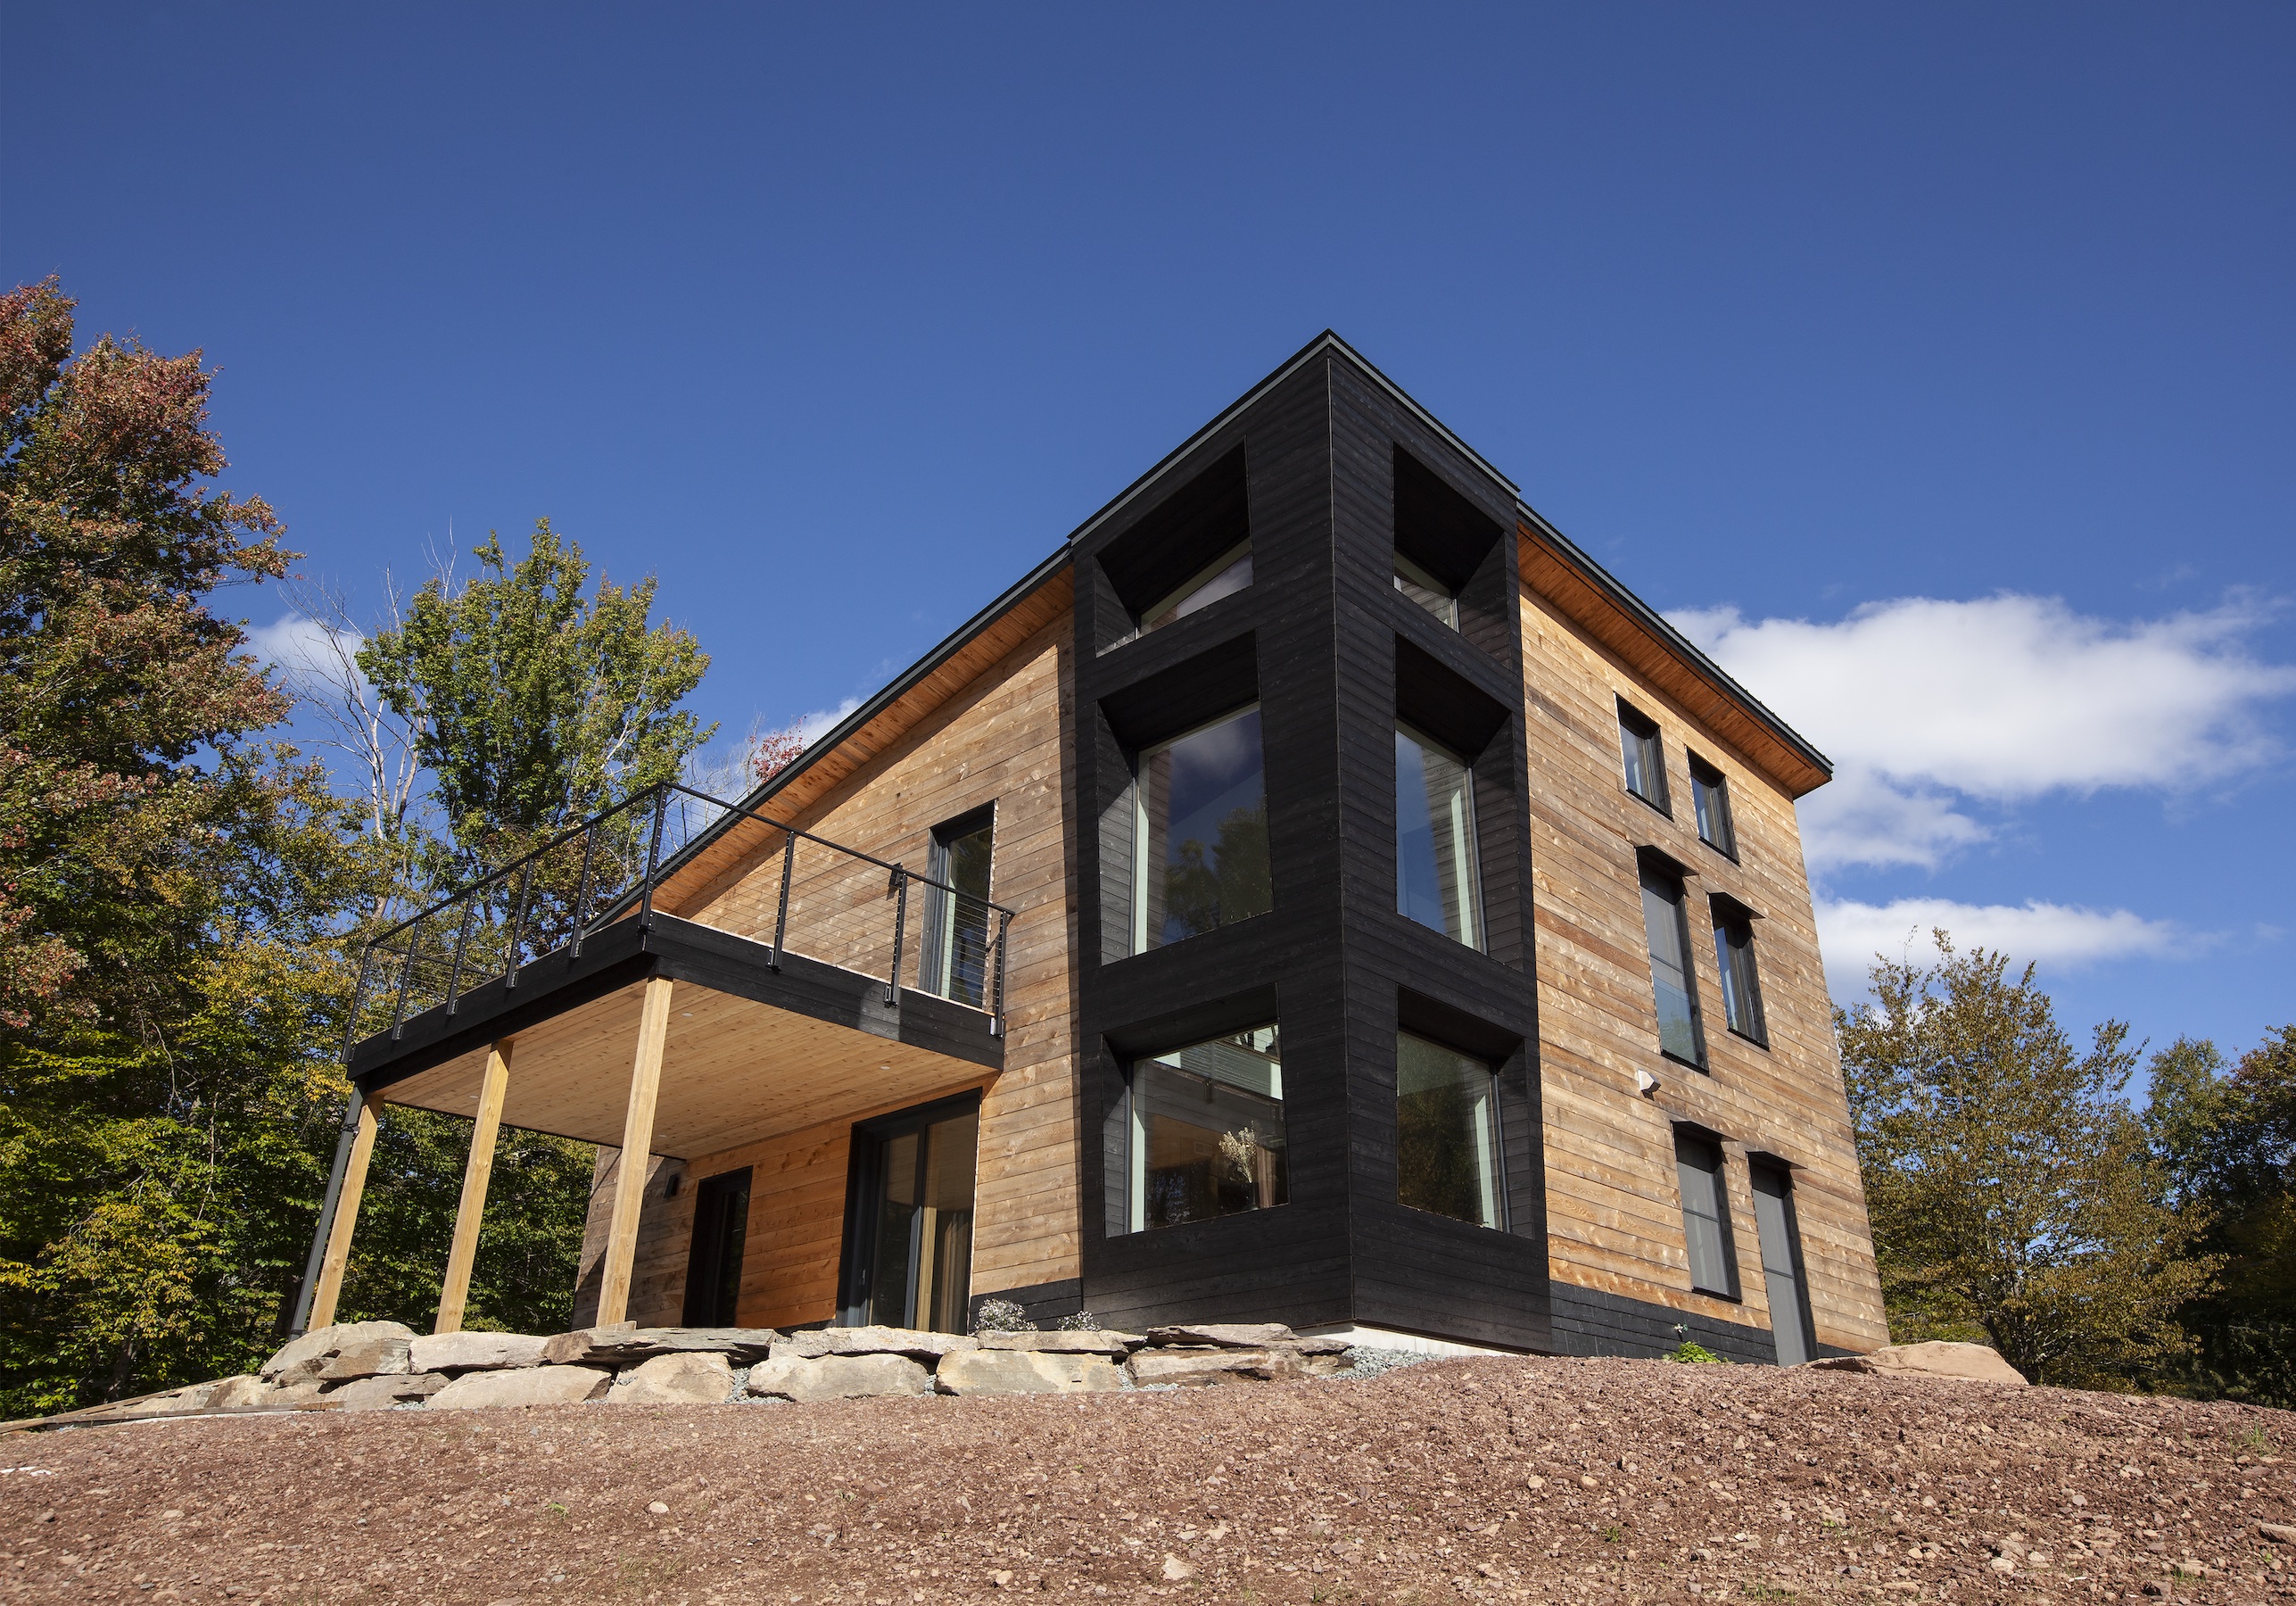 First carbon-neutral model Passive Home in Livingston Manor, N.Y